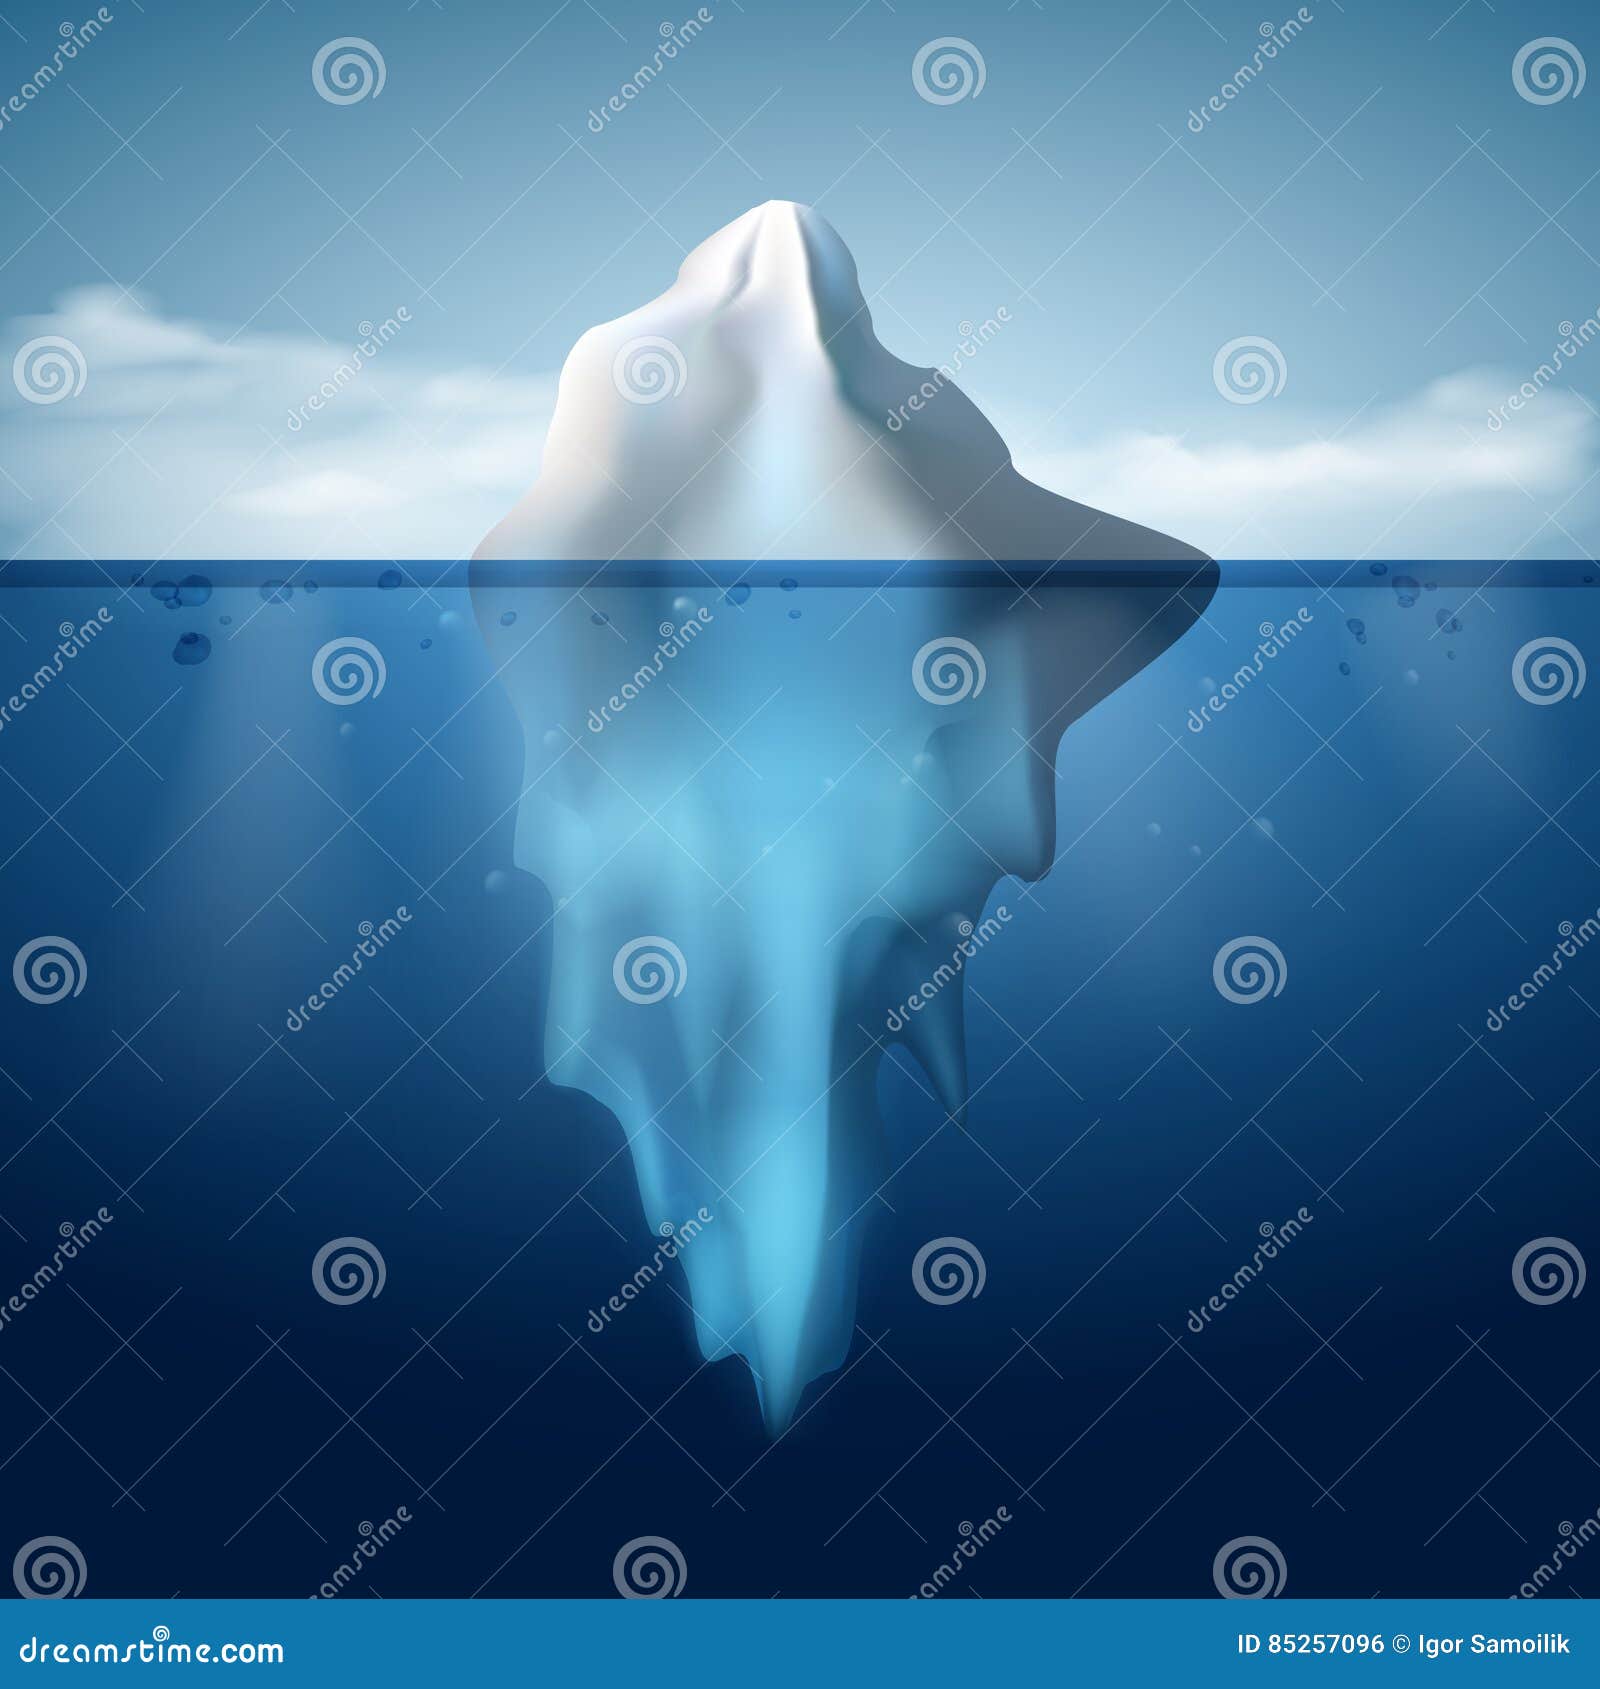 ice berg on water concept  background.